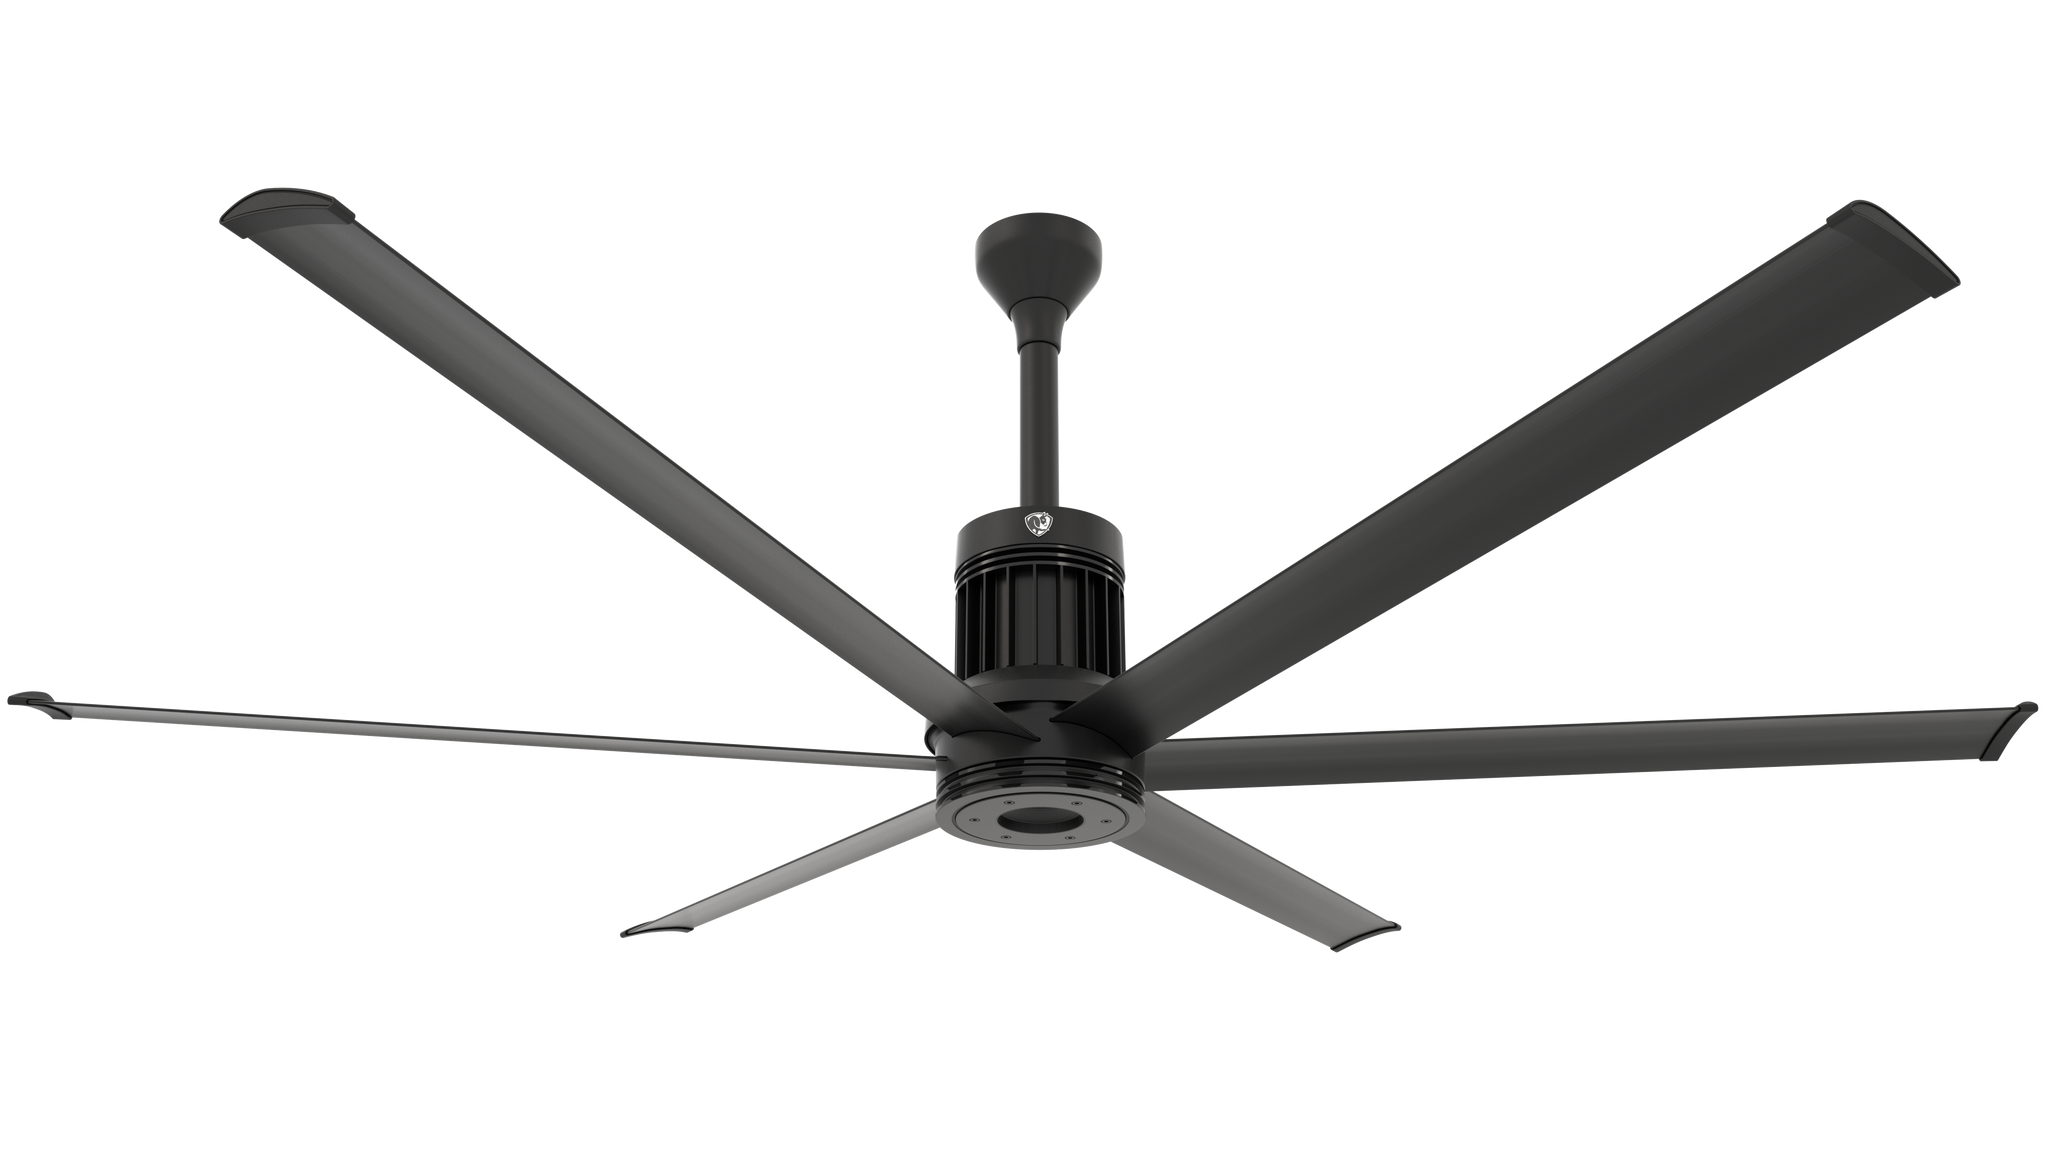 Big Ass Fans i6 84" Ceiling Fan in Black, Downrod 12", Covered Outdoors